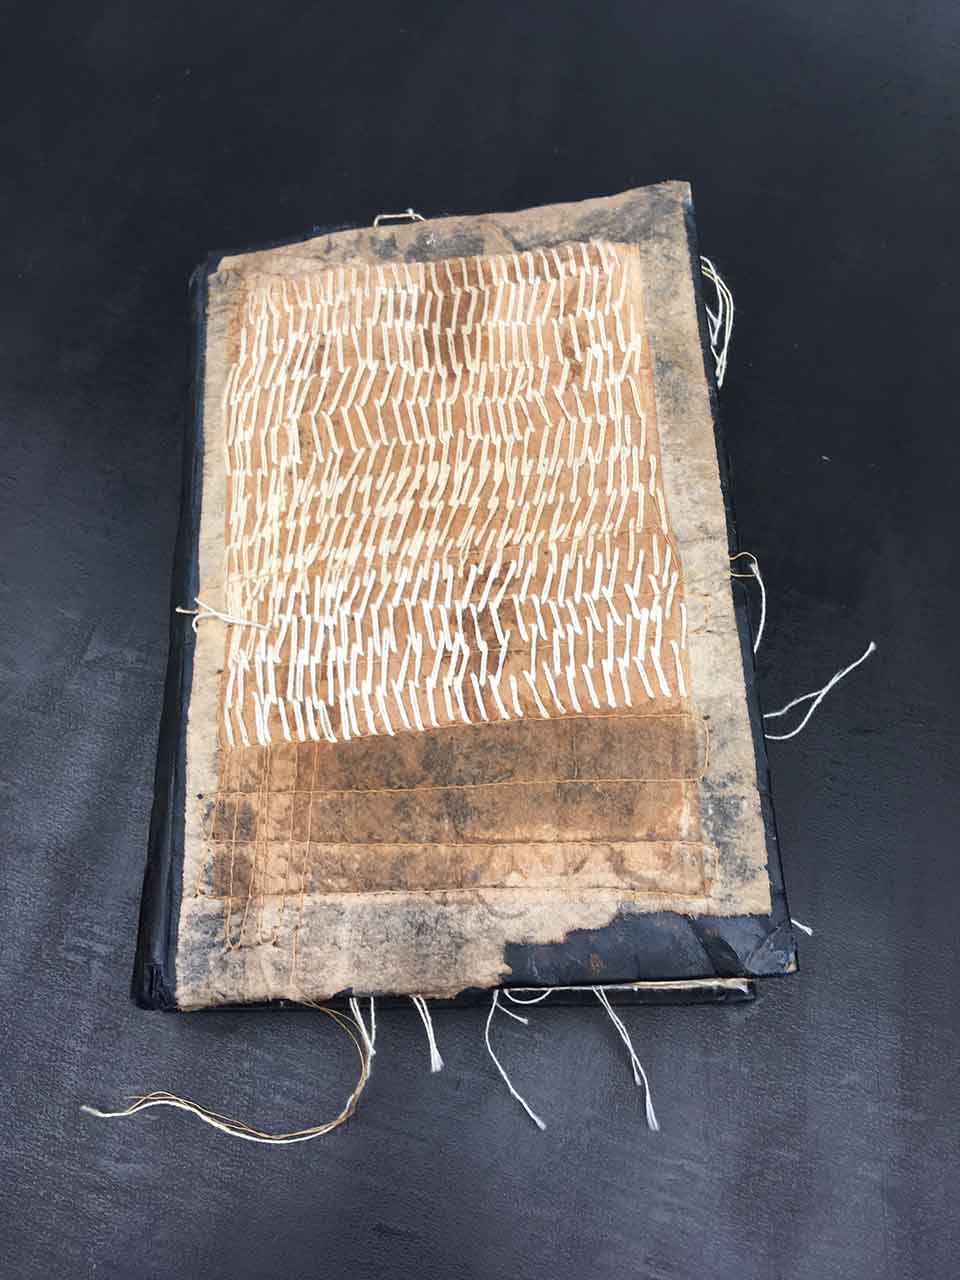 A photograph of a roughly hewn book with thick thread stitched into the cover